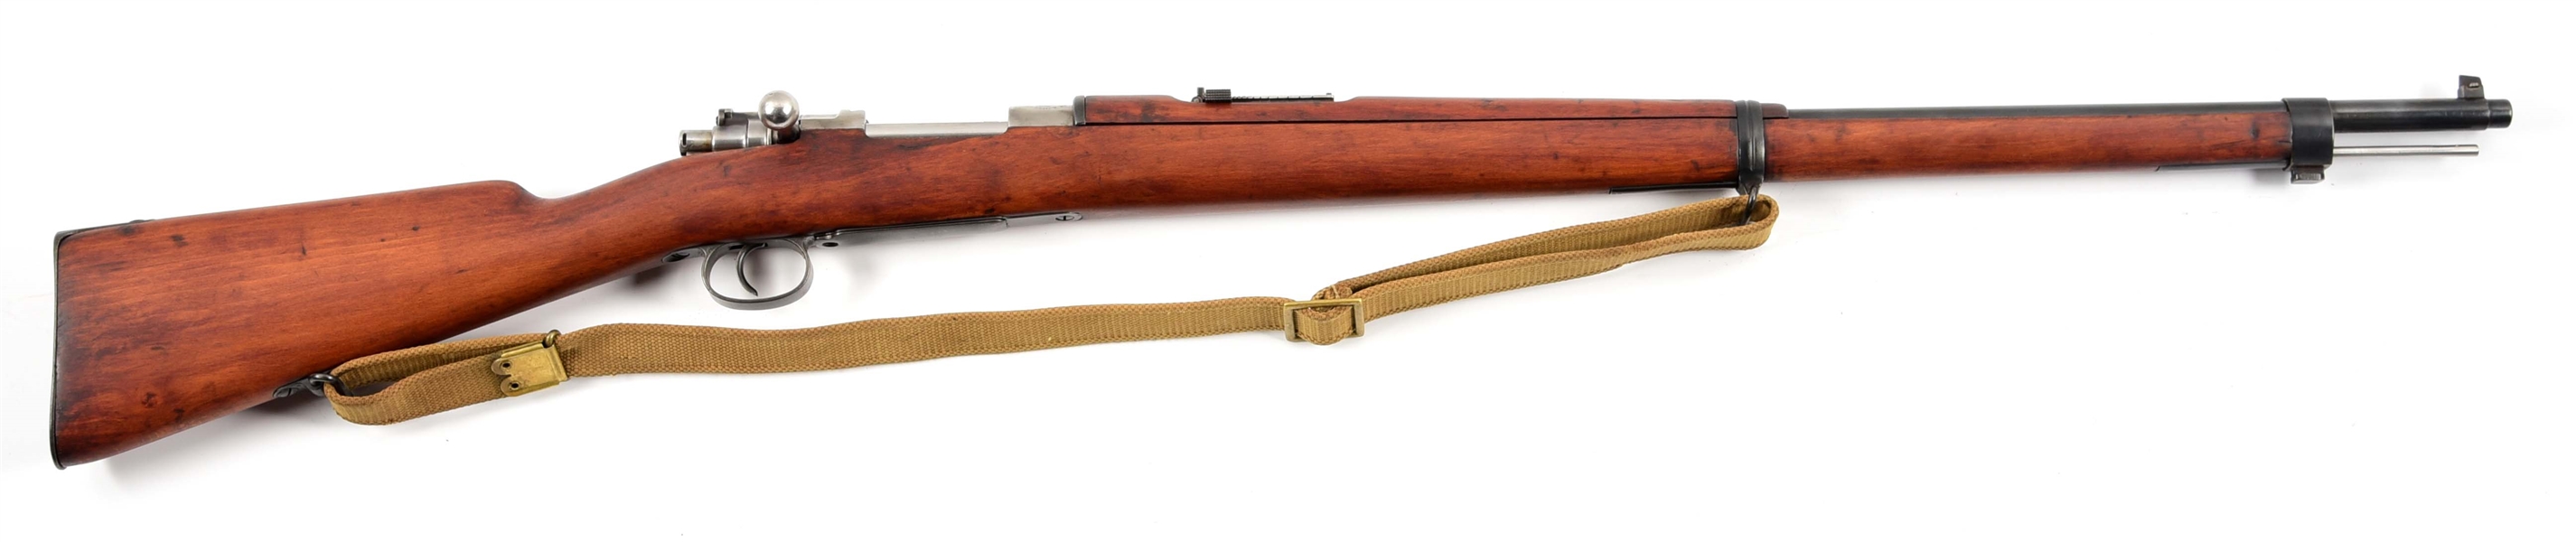 (C) MEXICAN CONTRACT 1910 MAUSER BOLT ACTION RIFLE.